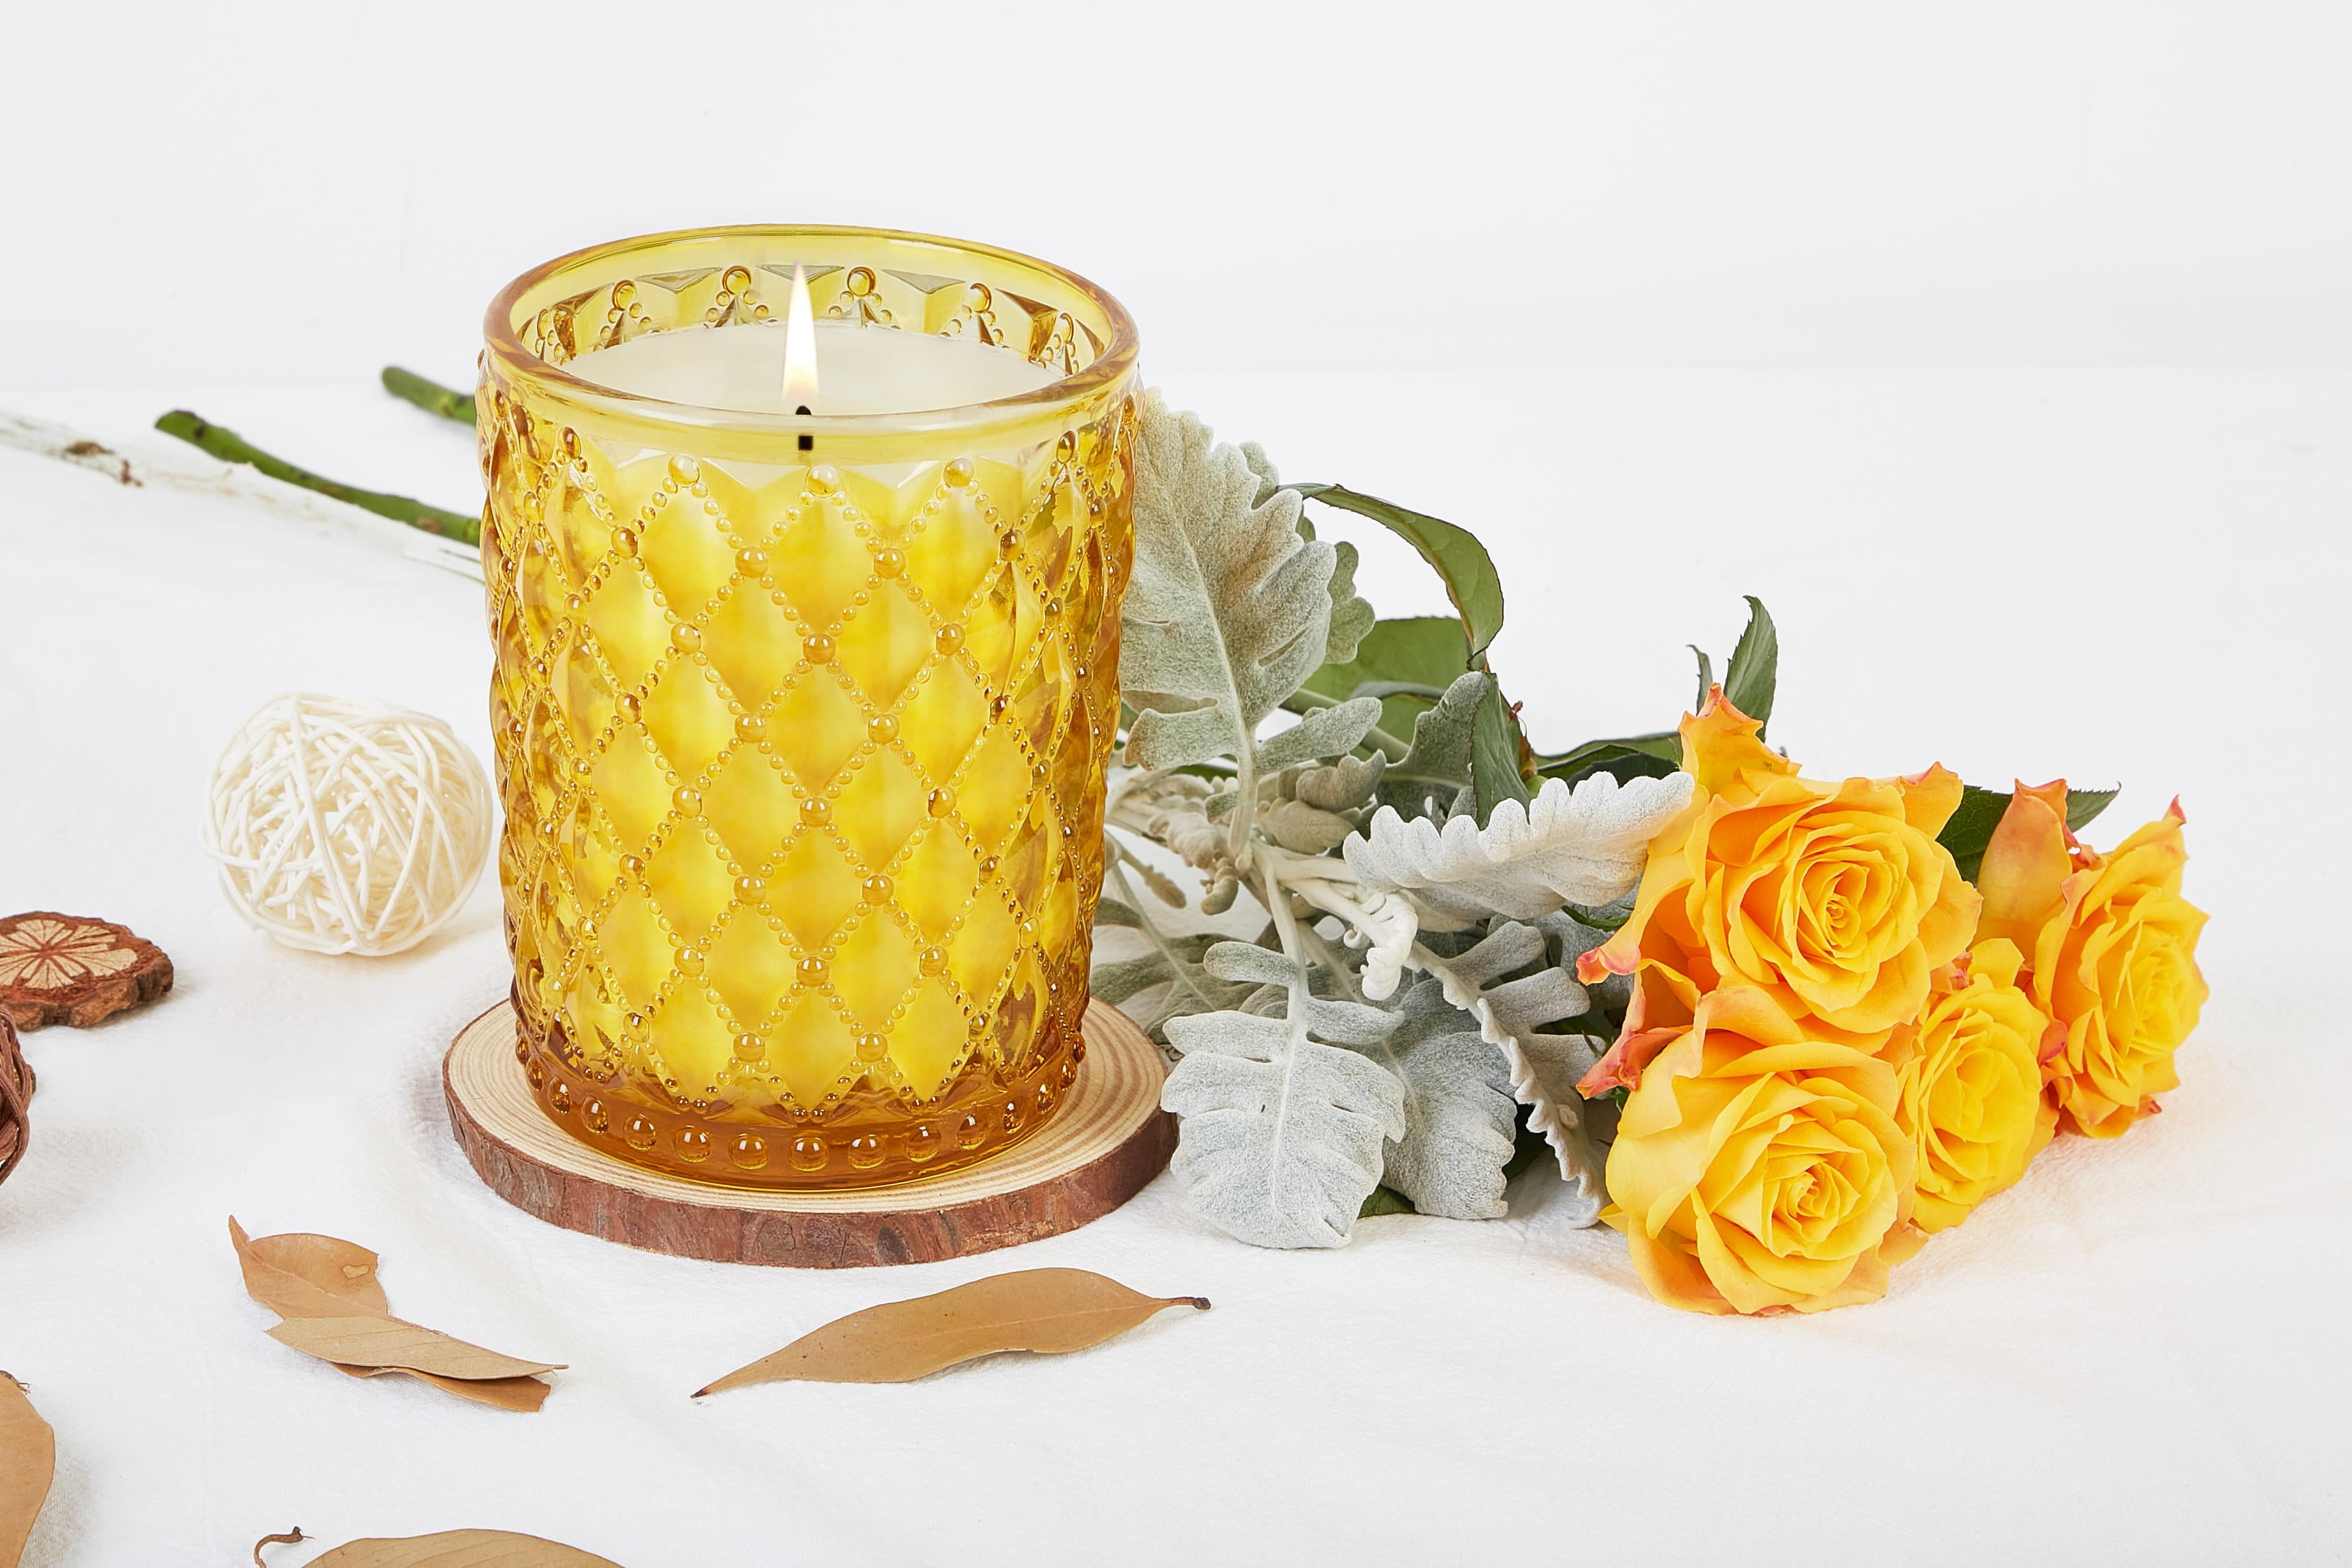 Natural Soy Wax Handmade Scented Candle Material 52 Degree - Temu